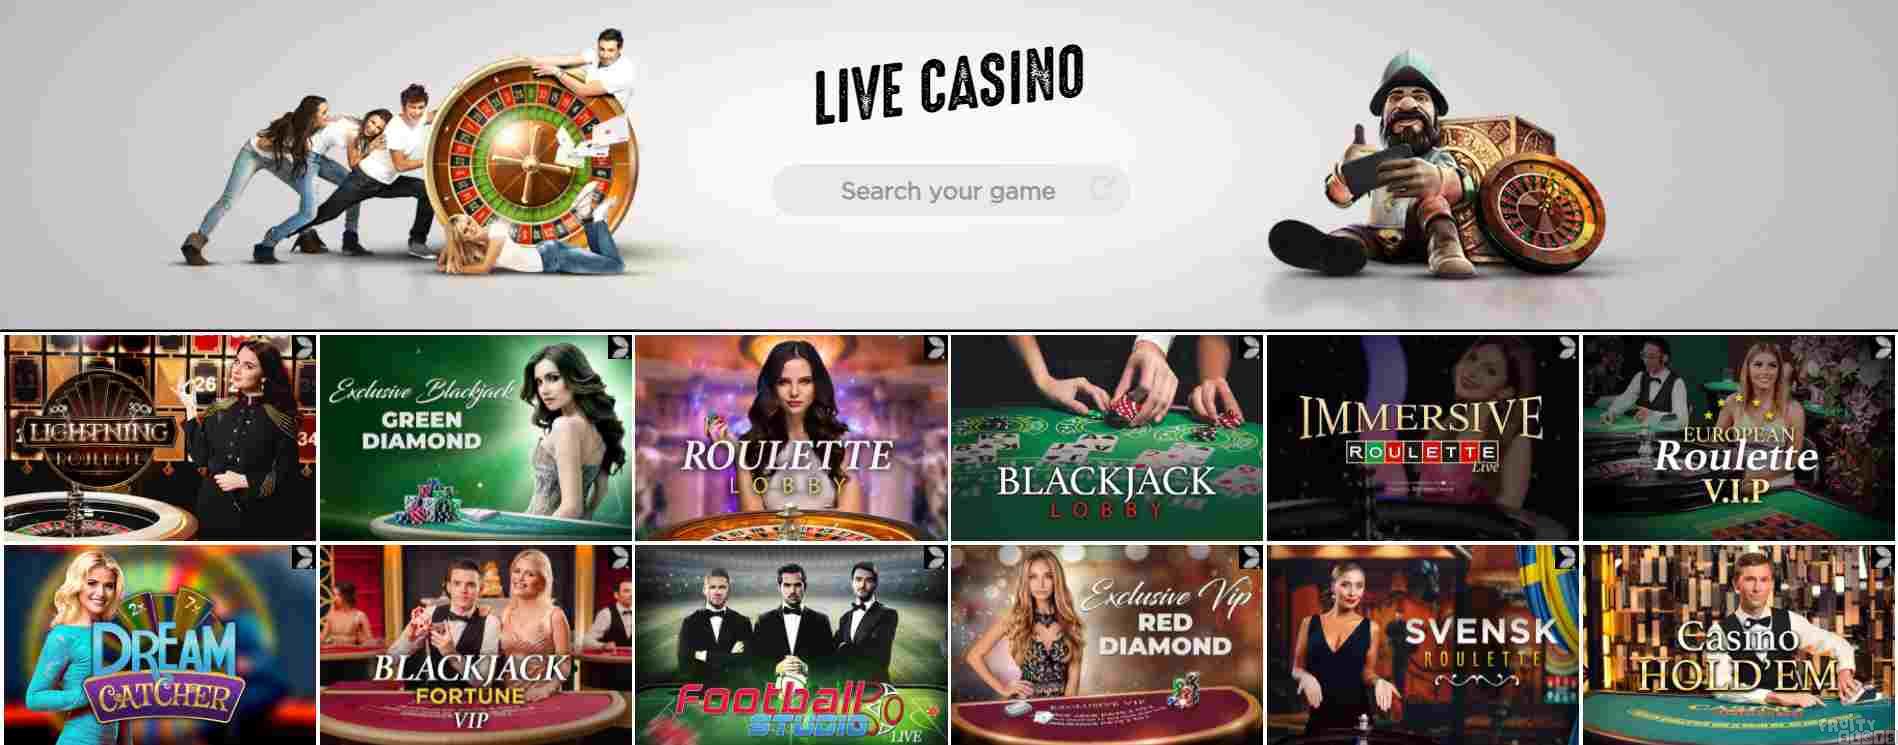 Spinit Casino Live Casino and Table Games